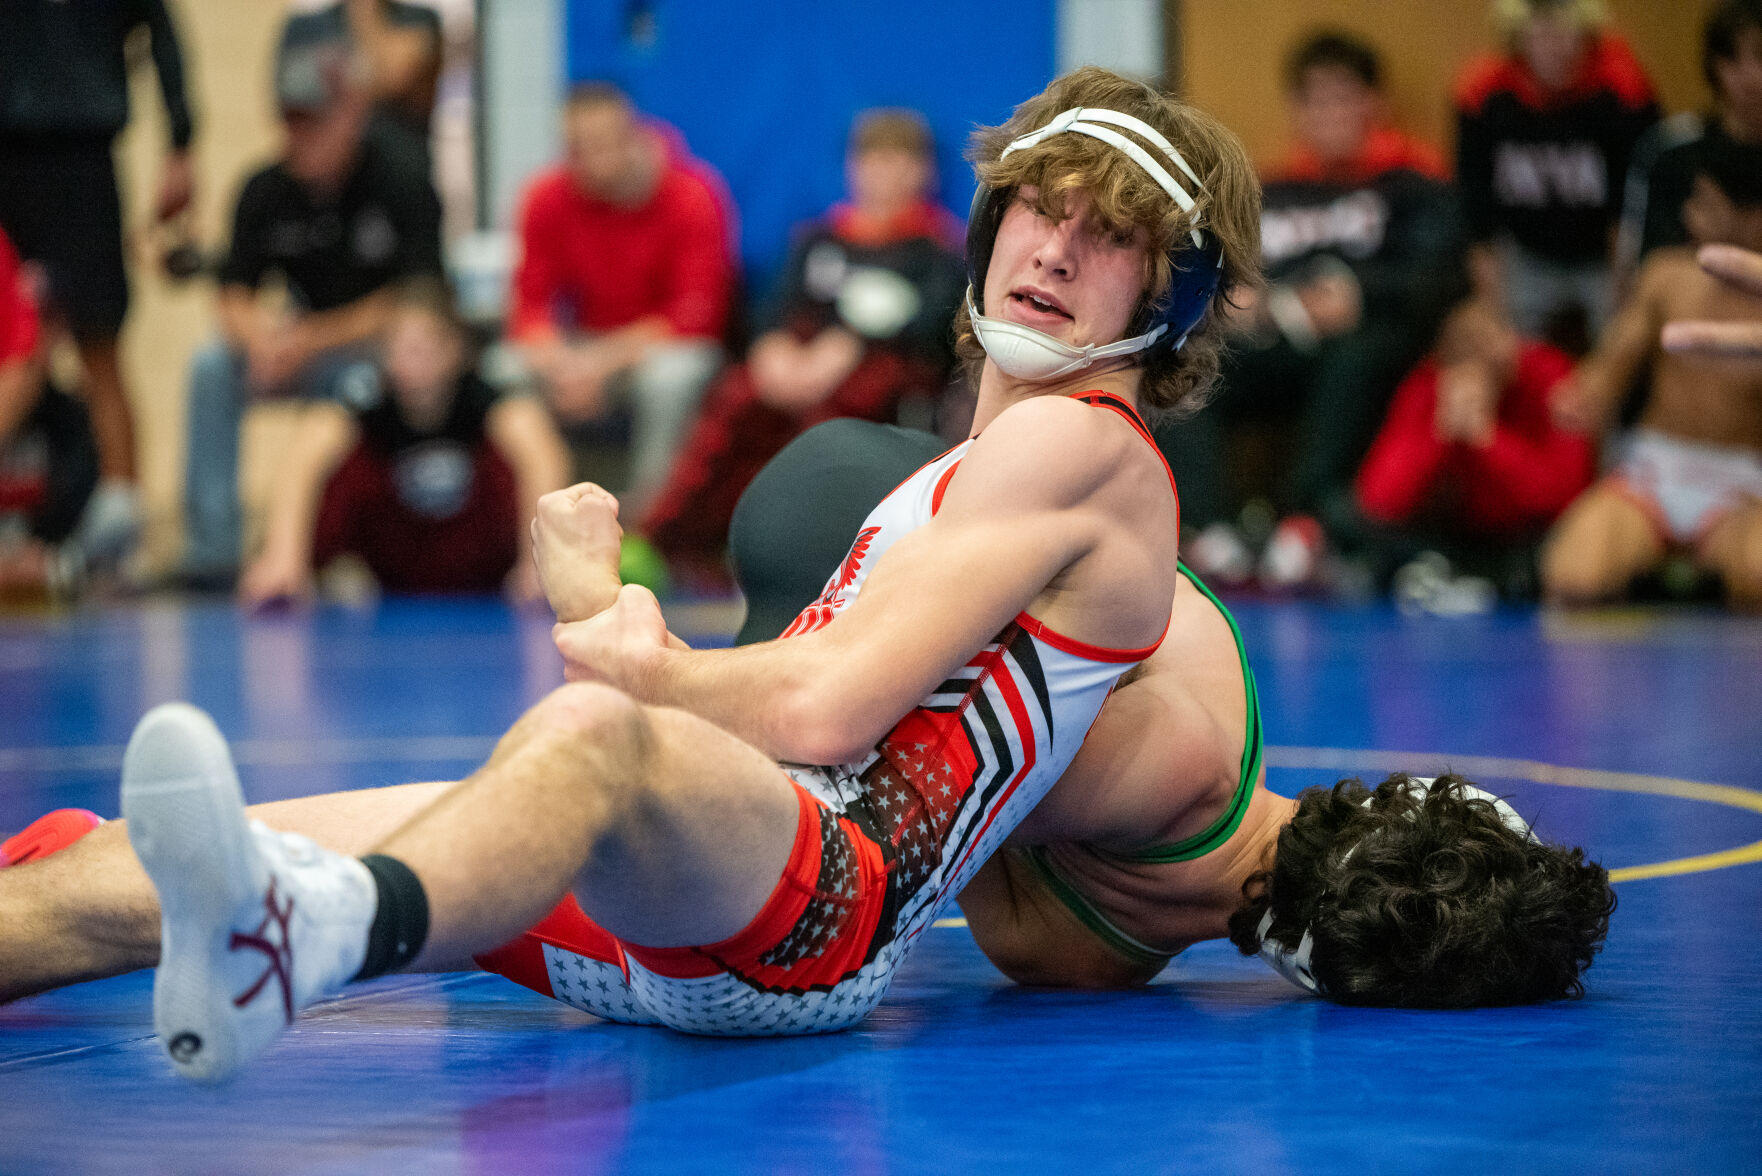 Niagara Wheatfield High School Wrestling Team: Journey to State Duals Competition